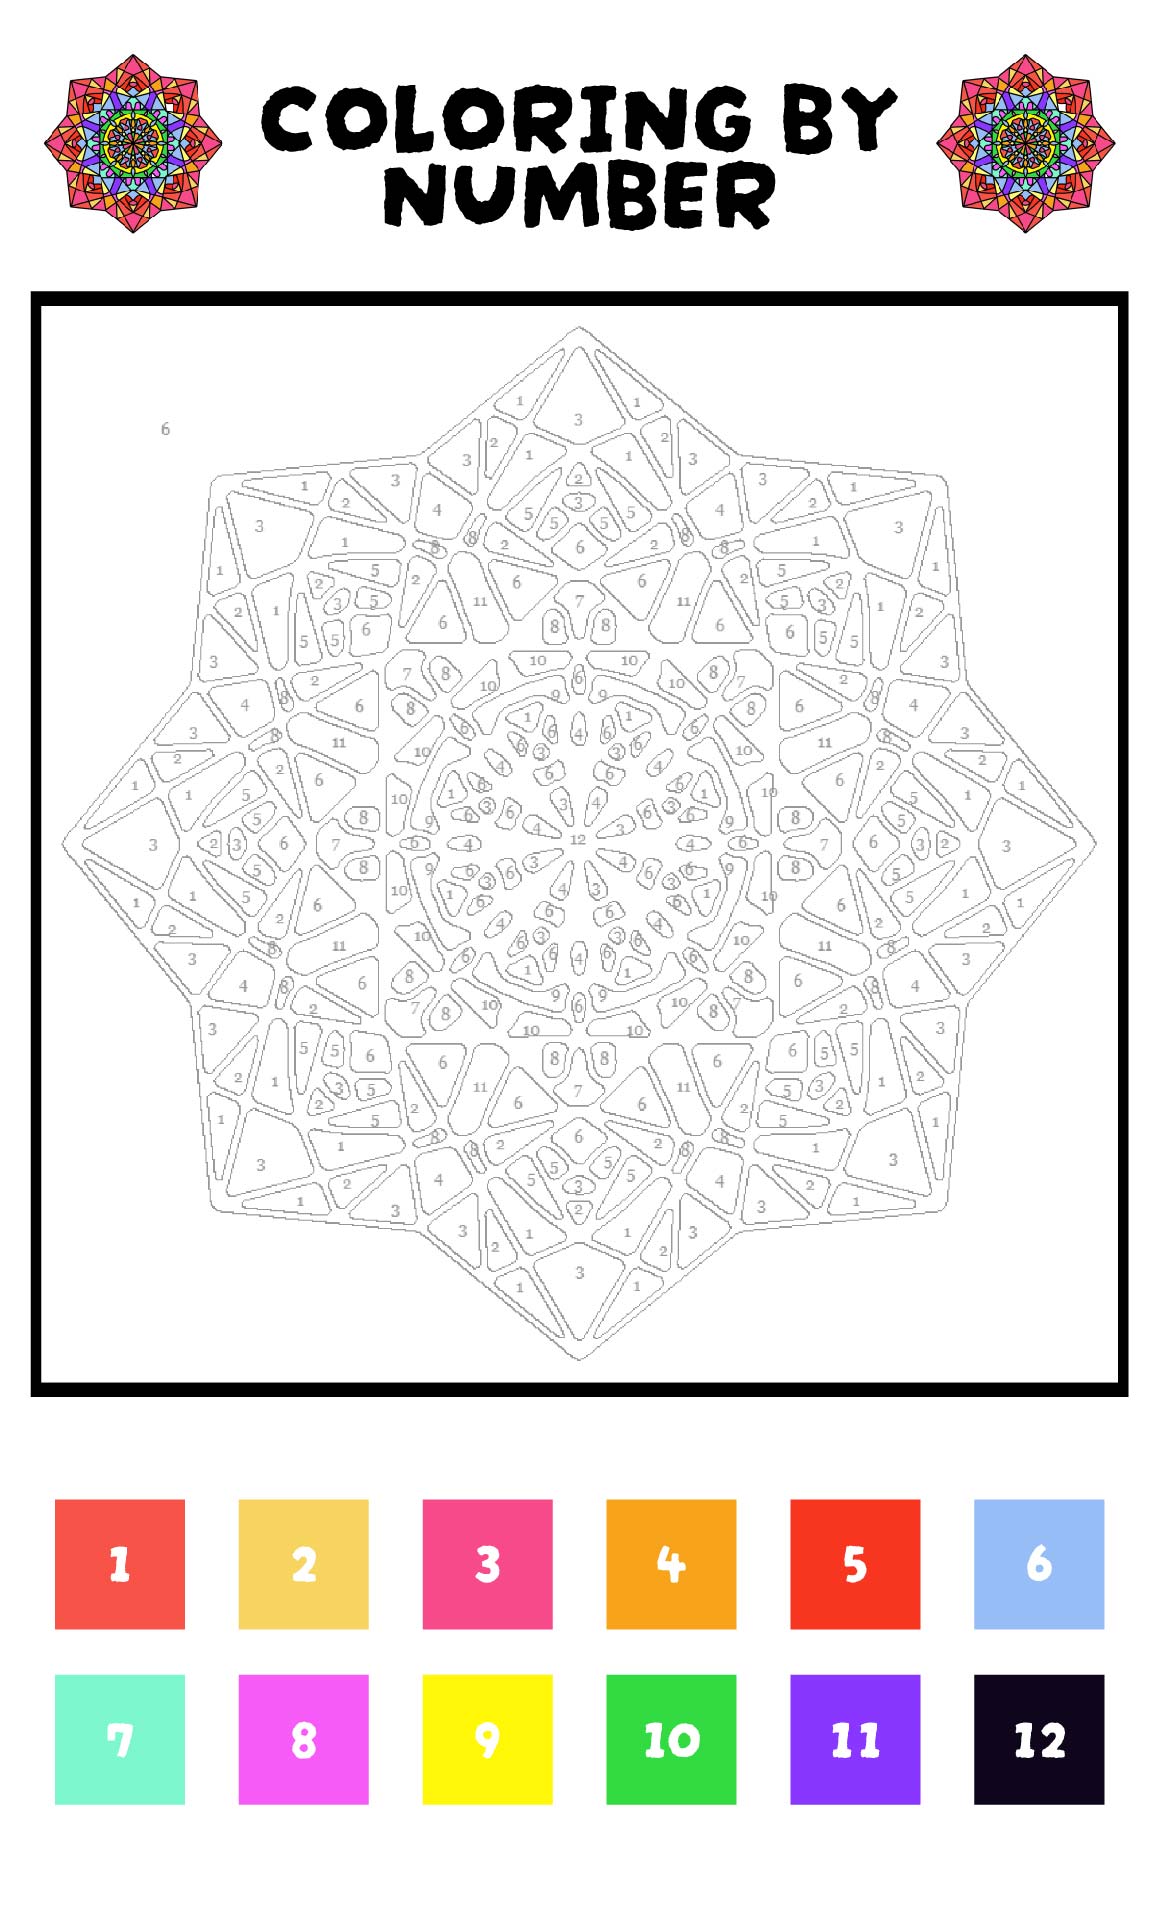 Inspirational Color by Number Printables for Adults Pdf -  Thevillageanthology.com